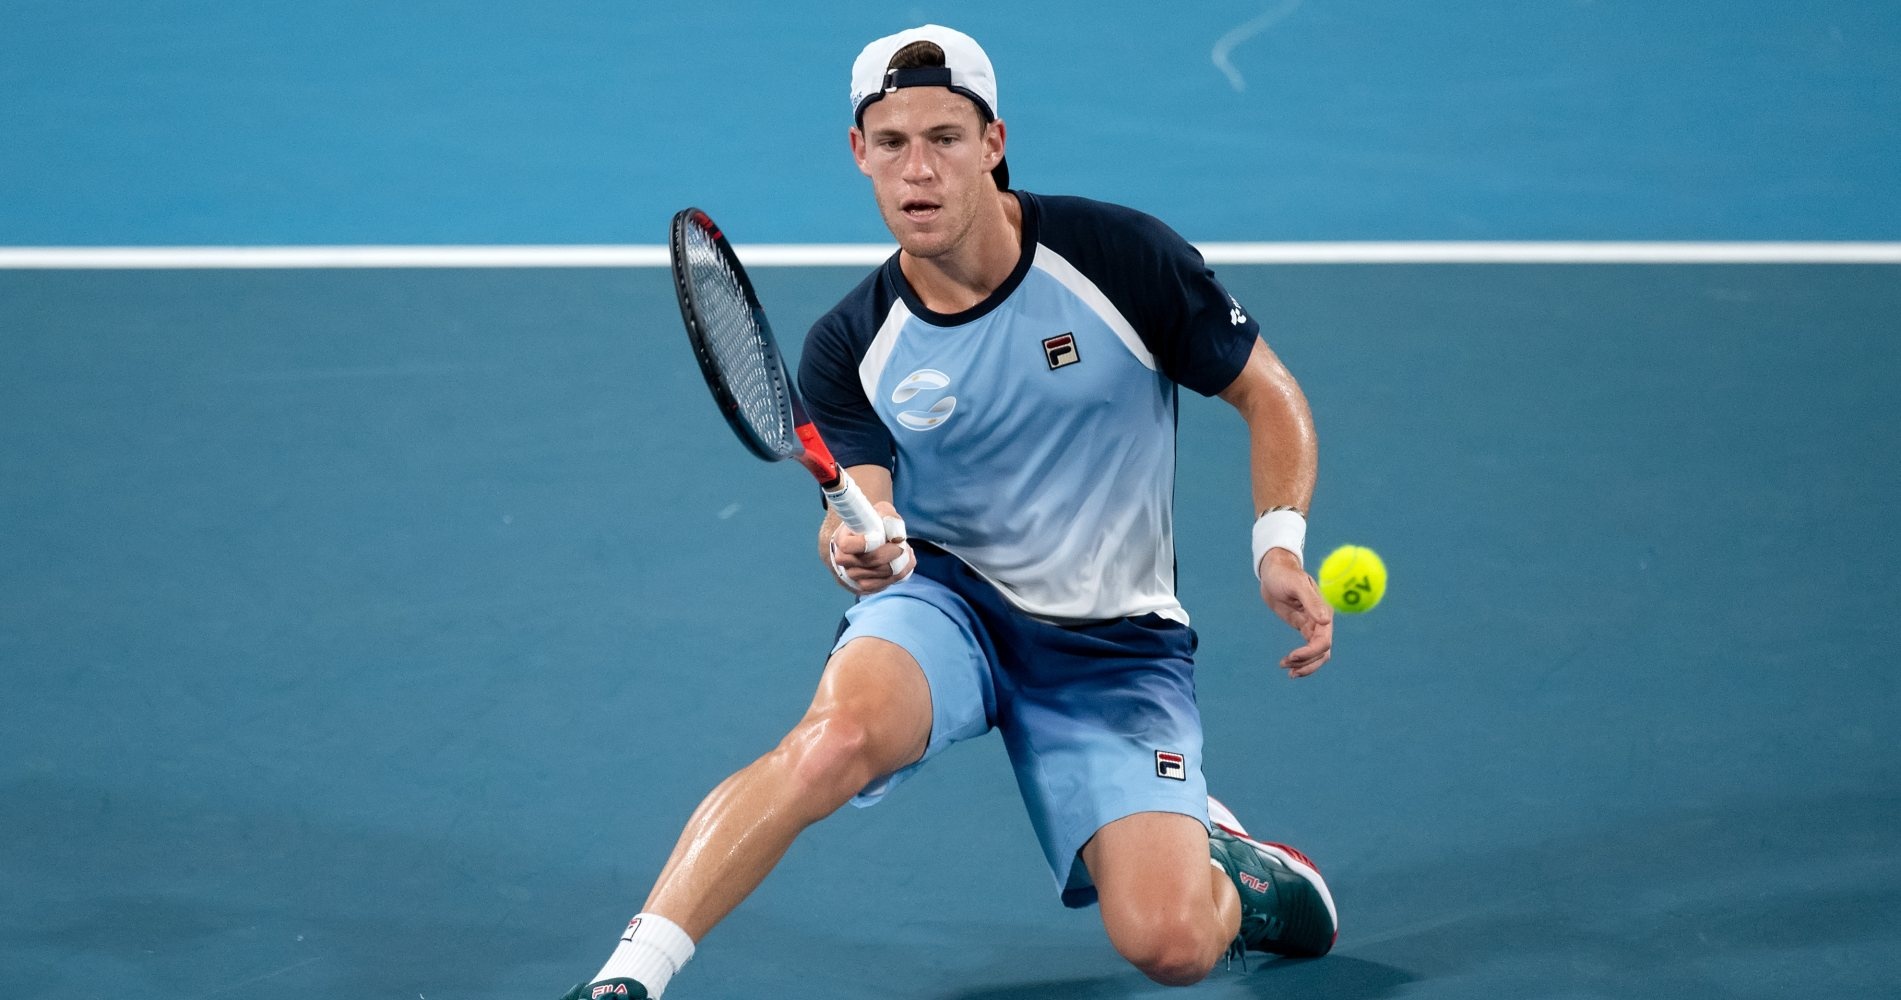 Tennis Everything you wanted to know about Diego Schwartzman